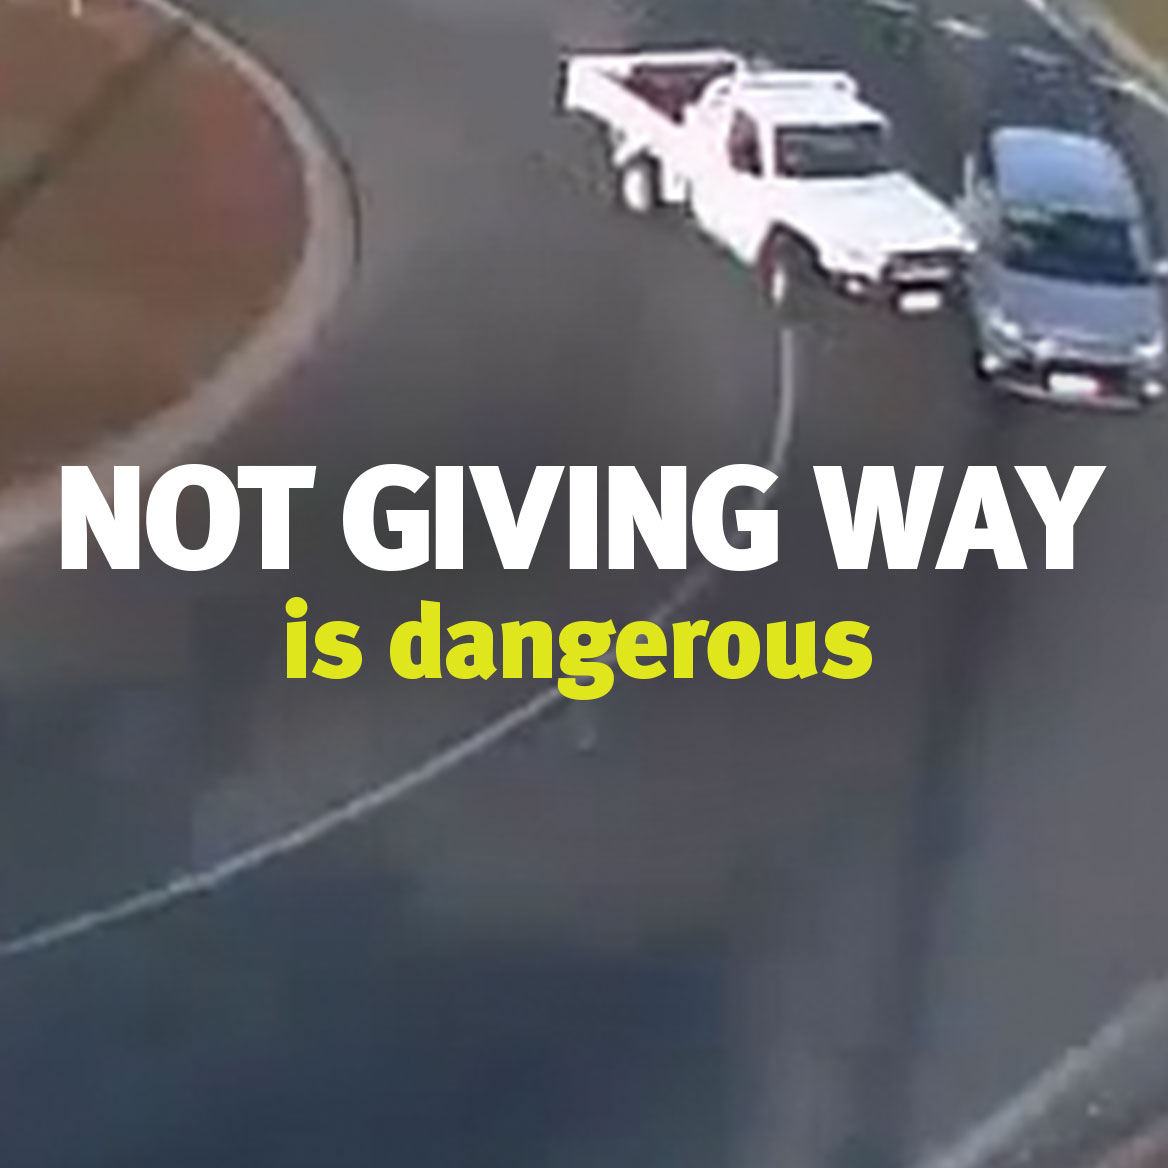 Screenshot from traffic light CCTV footage that says 'Not giving way is dangerous'